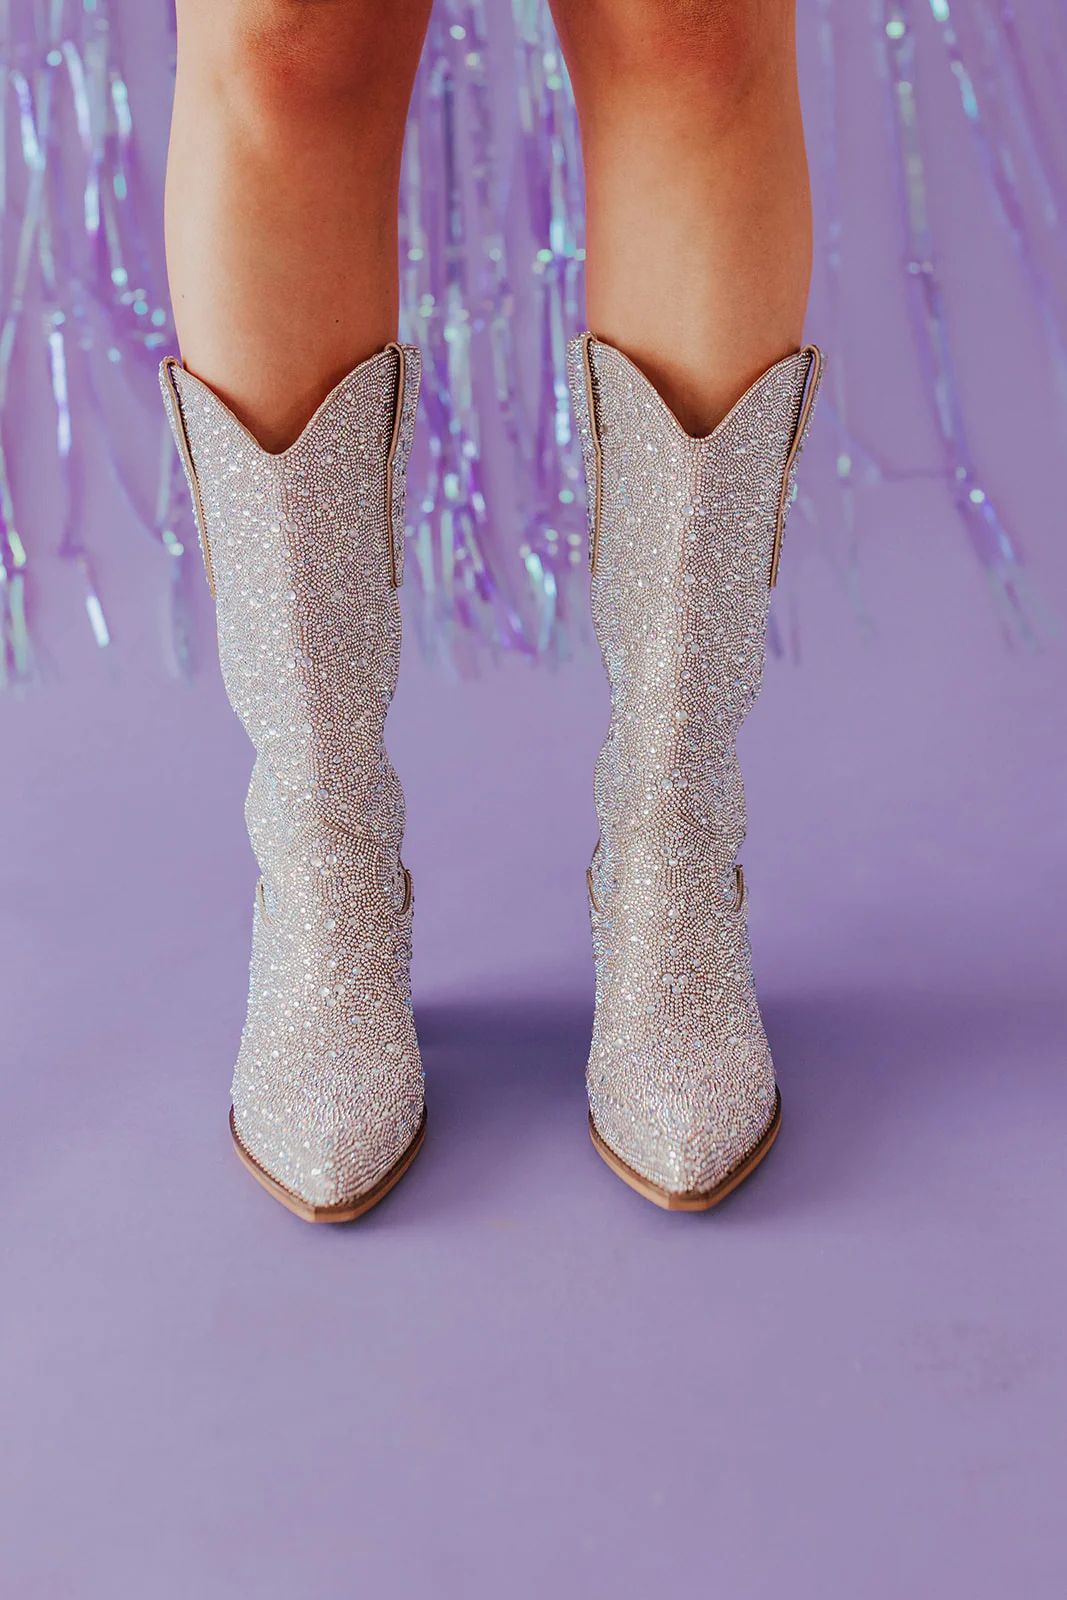 THE RHINESTONE BOOTS IN SILVER | Pink Desert